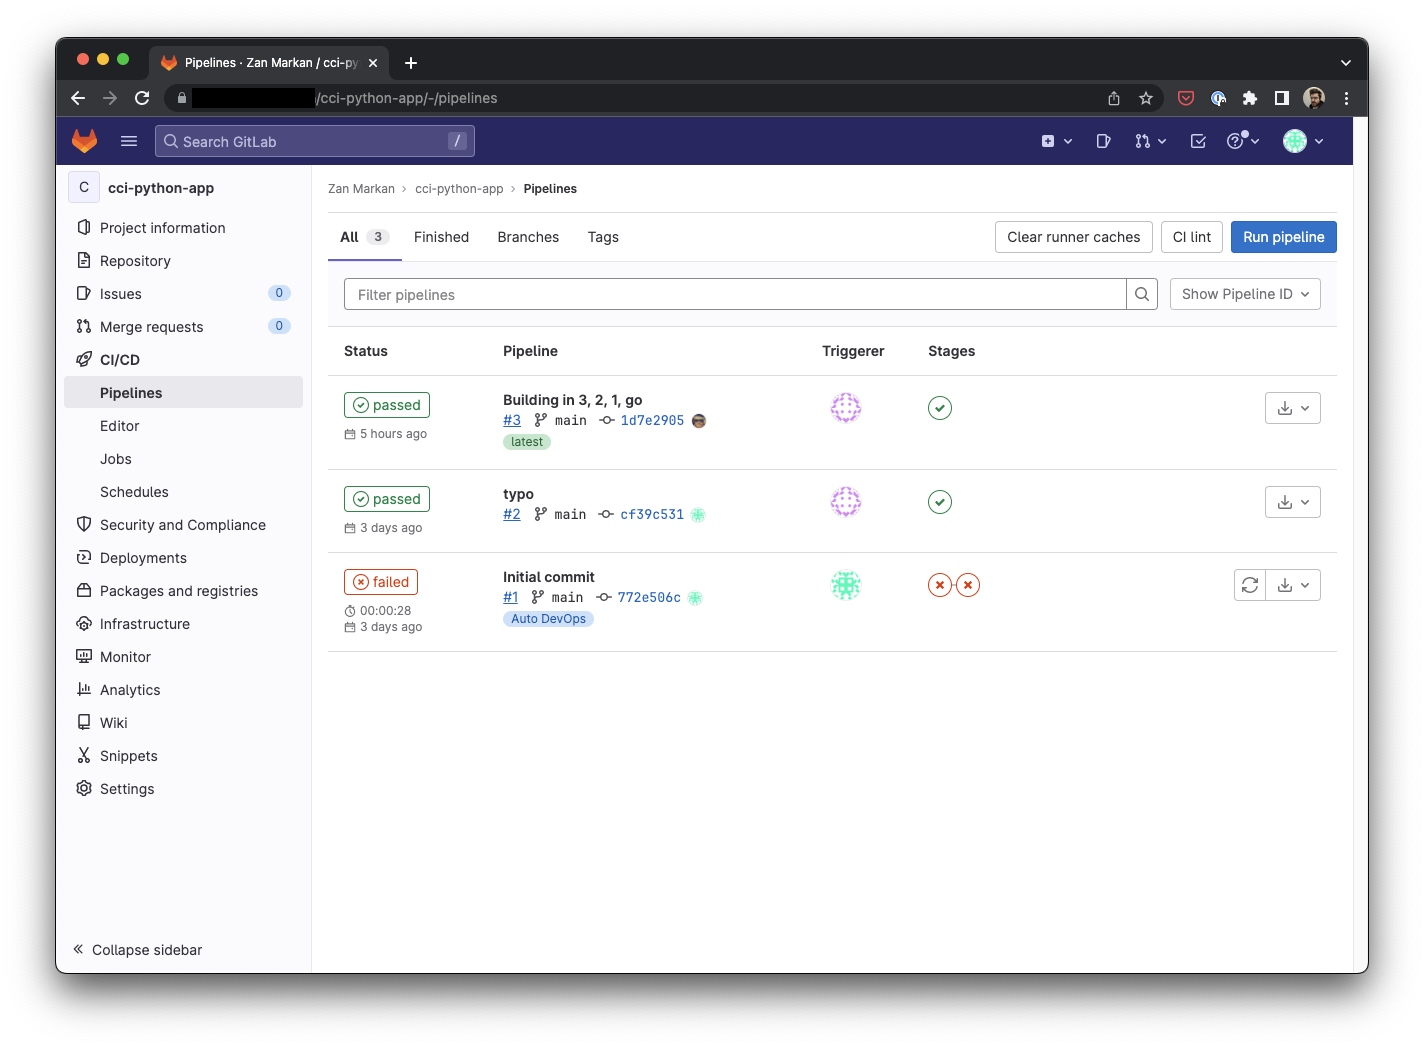 GitLab pipelines view